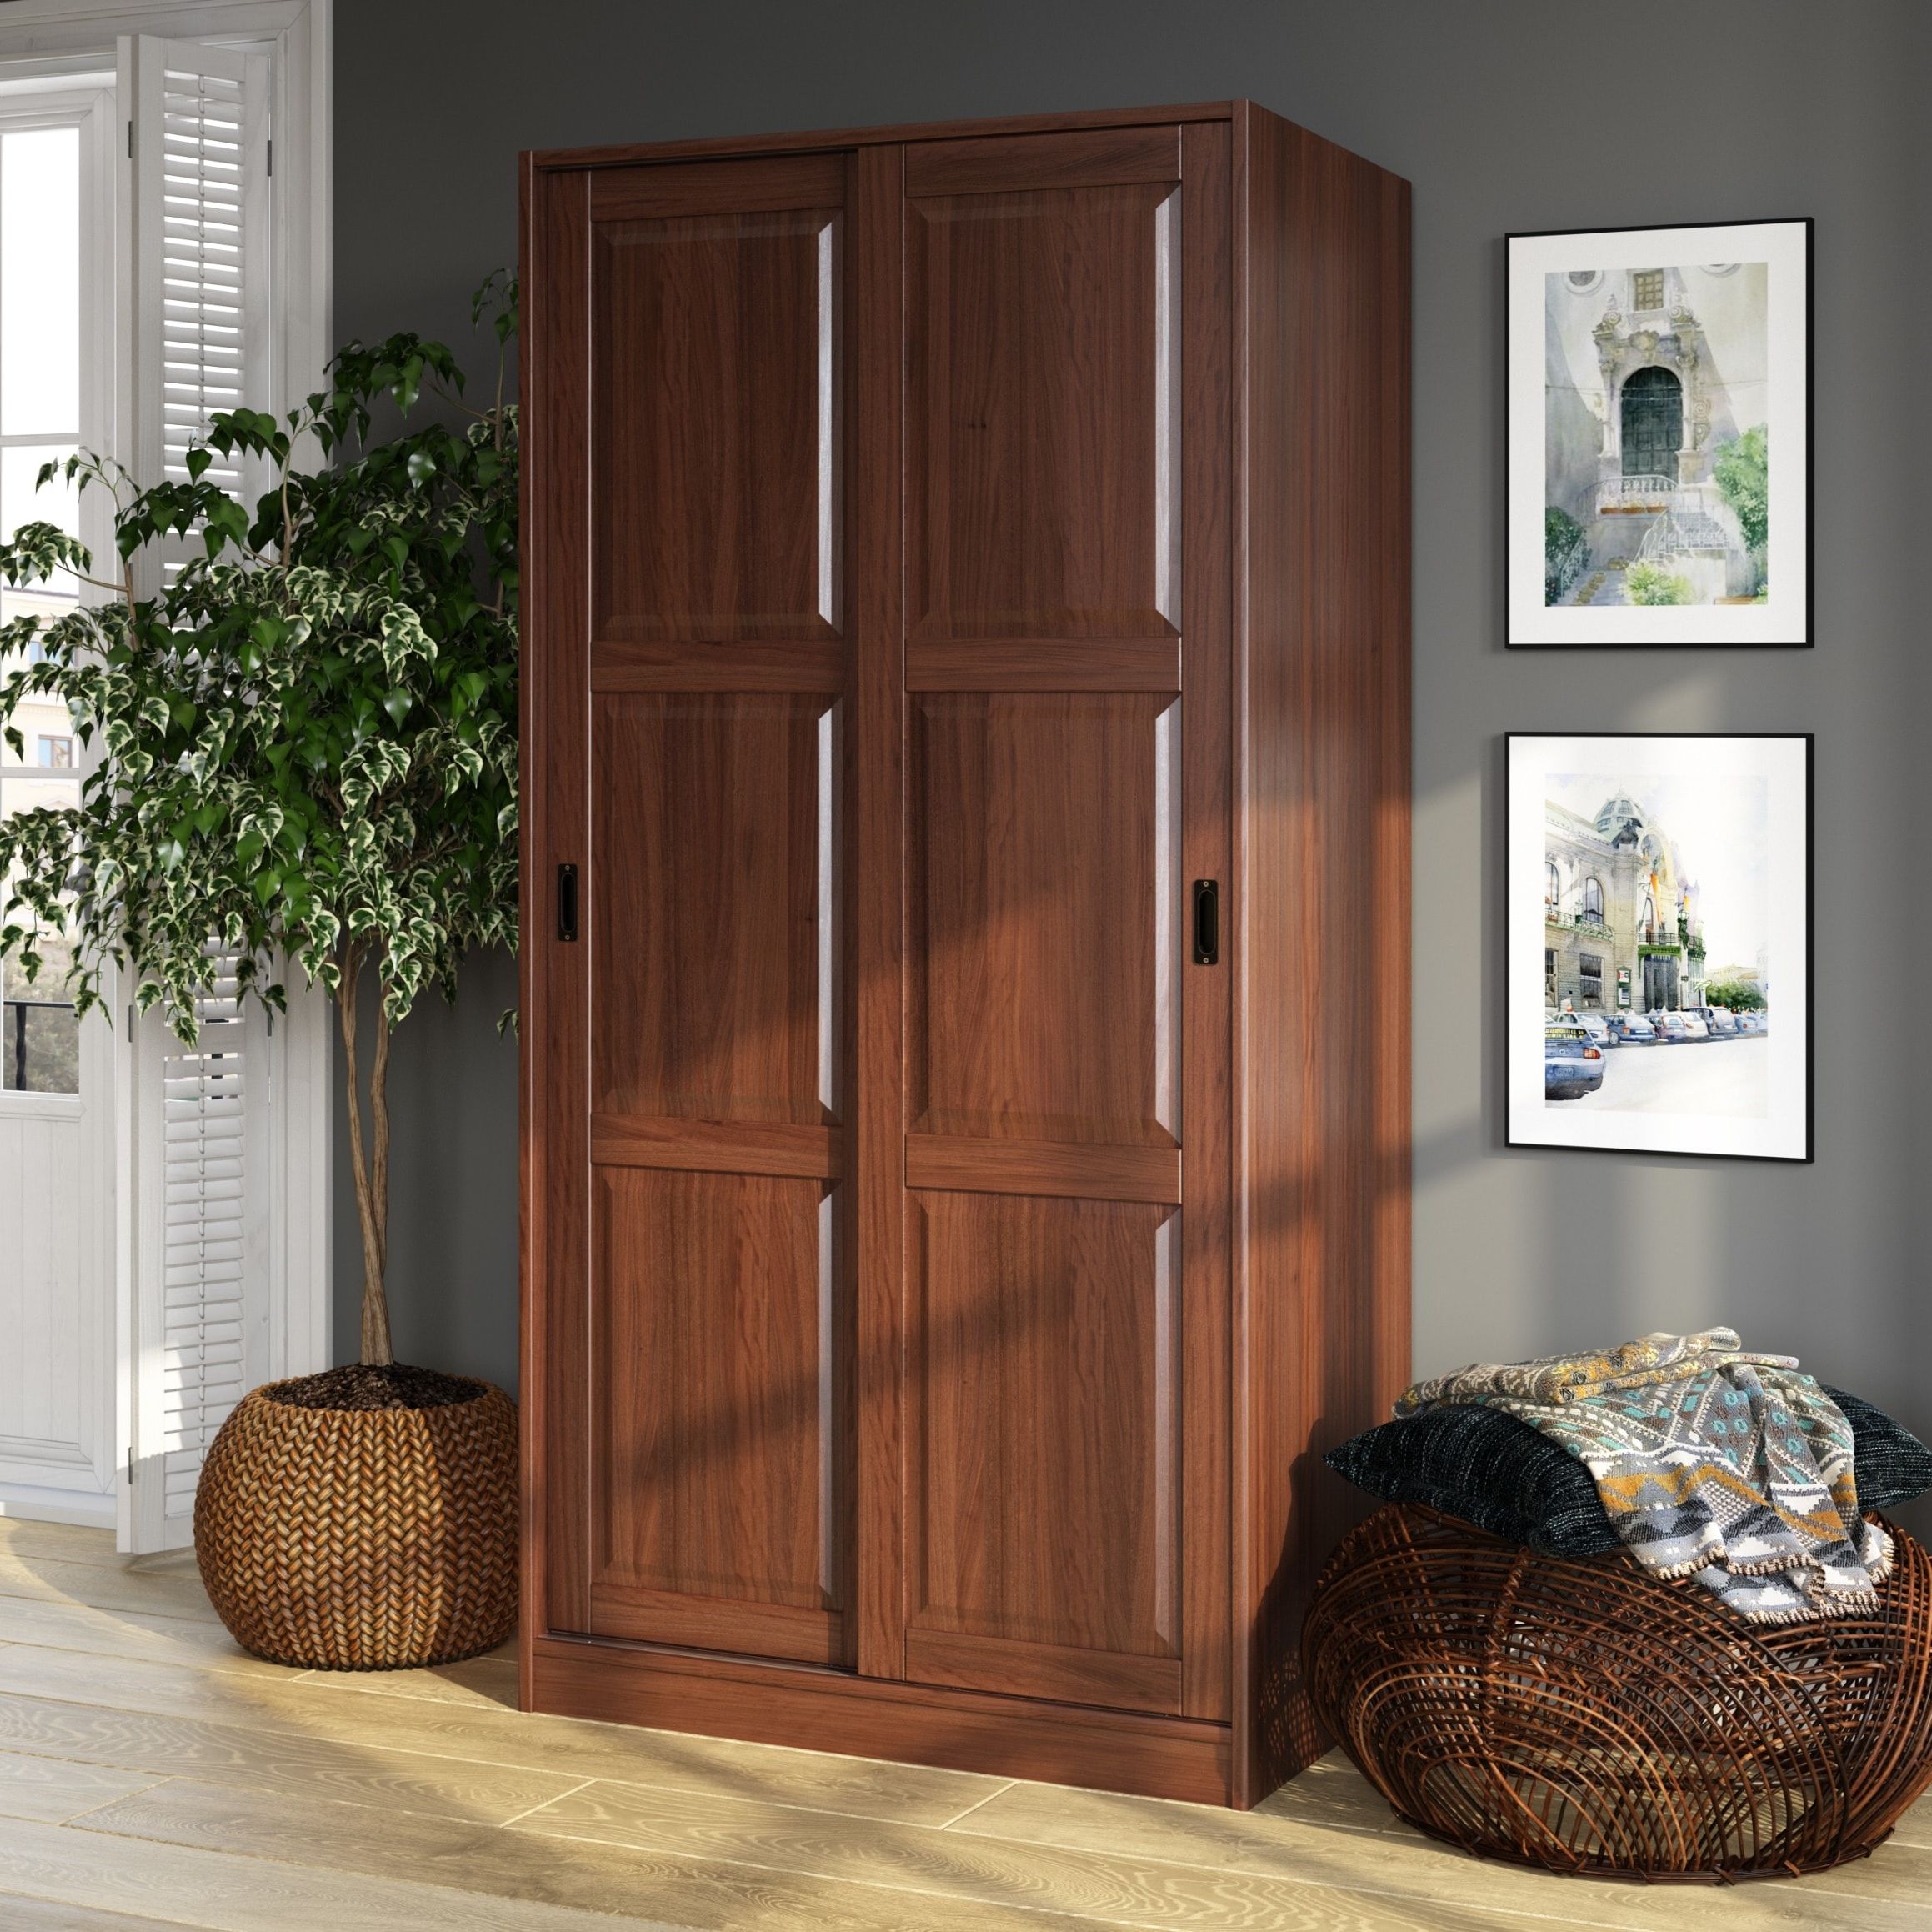 Palace Imports 100% Solid Wood 2 Sliding Door Wardrobe Armoire With  Mirrored, Closed Louvered Or Raised Panel Doors – Bed Bath & Beyond –  20000830 Regarding Cheap Solid Wood Wardrobes (View 13 of 20)